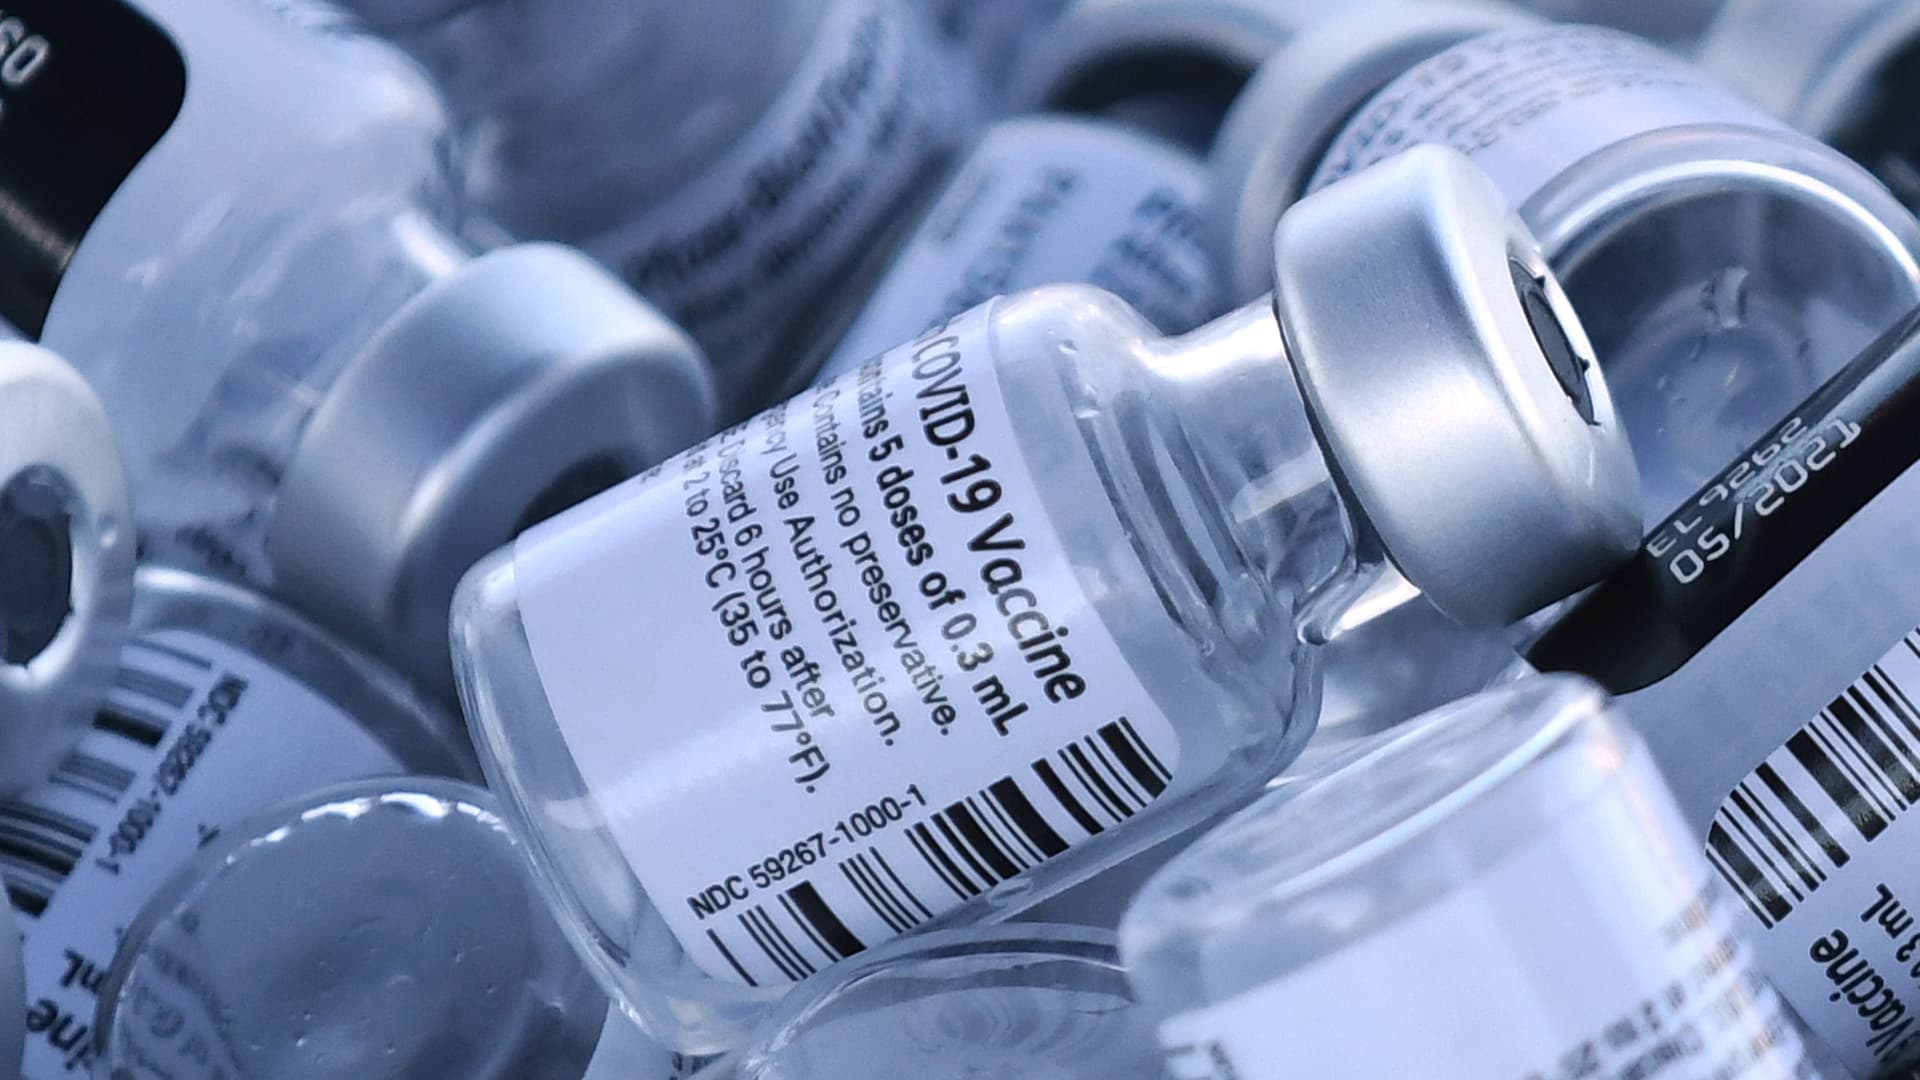 Empty vials of the Pfizer COVID-19 vaccine are seen at a first come first serve drive-thru vaccination site operated by the Lake County Health Department on January 28, 2021 in Groveland, Florida.